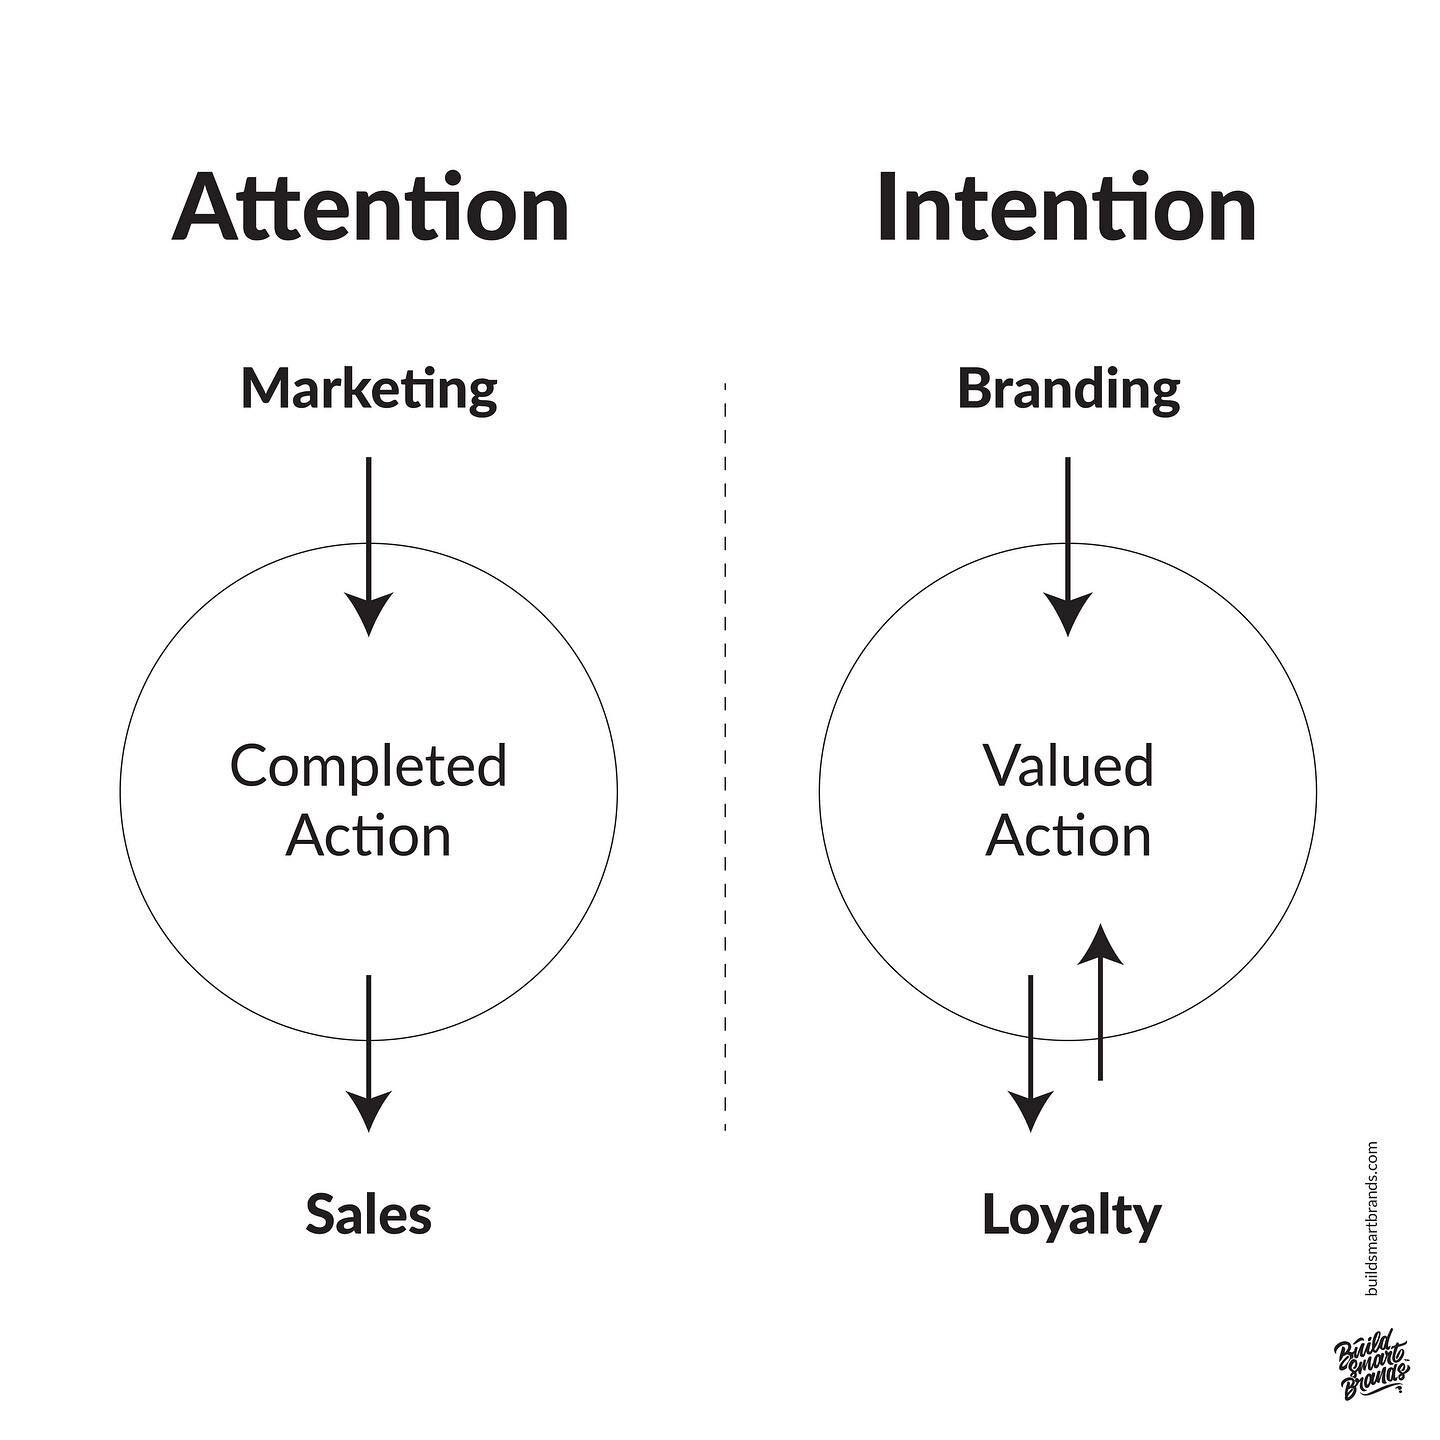 Attention vs Intention 

Each year businesses spend up to 10% of their revenue on marketing to simply get your attention, to bring awareness to a message or call to action. 

Intention however costs nothing but means everything. It's the heart behind